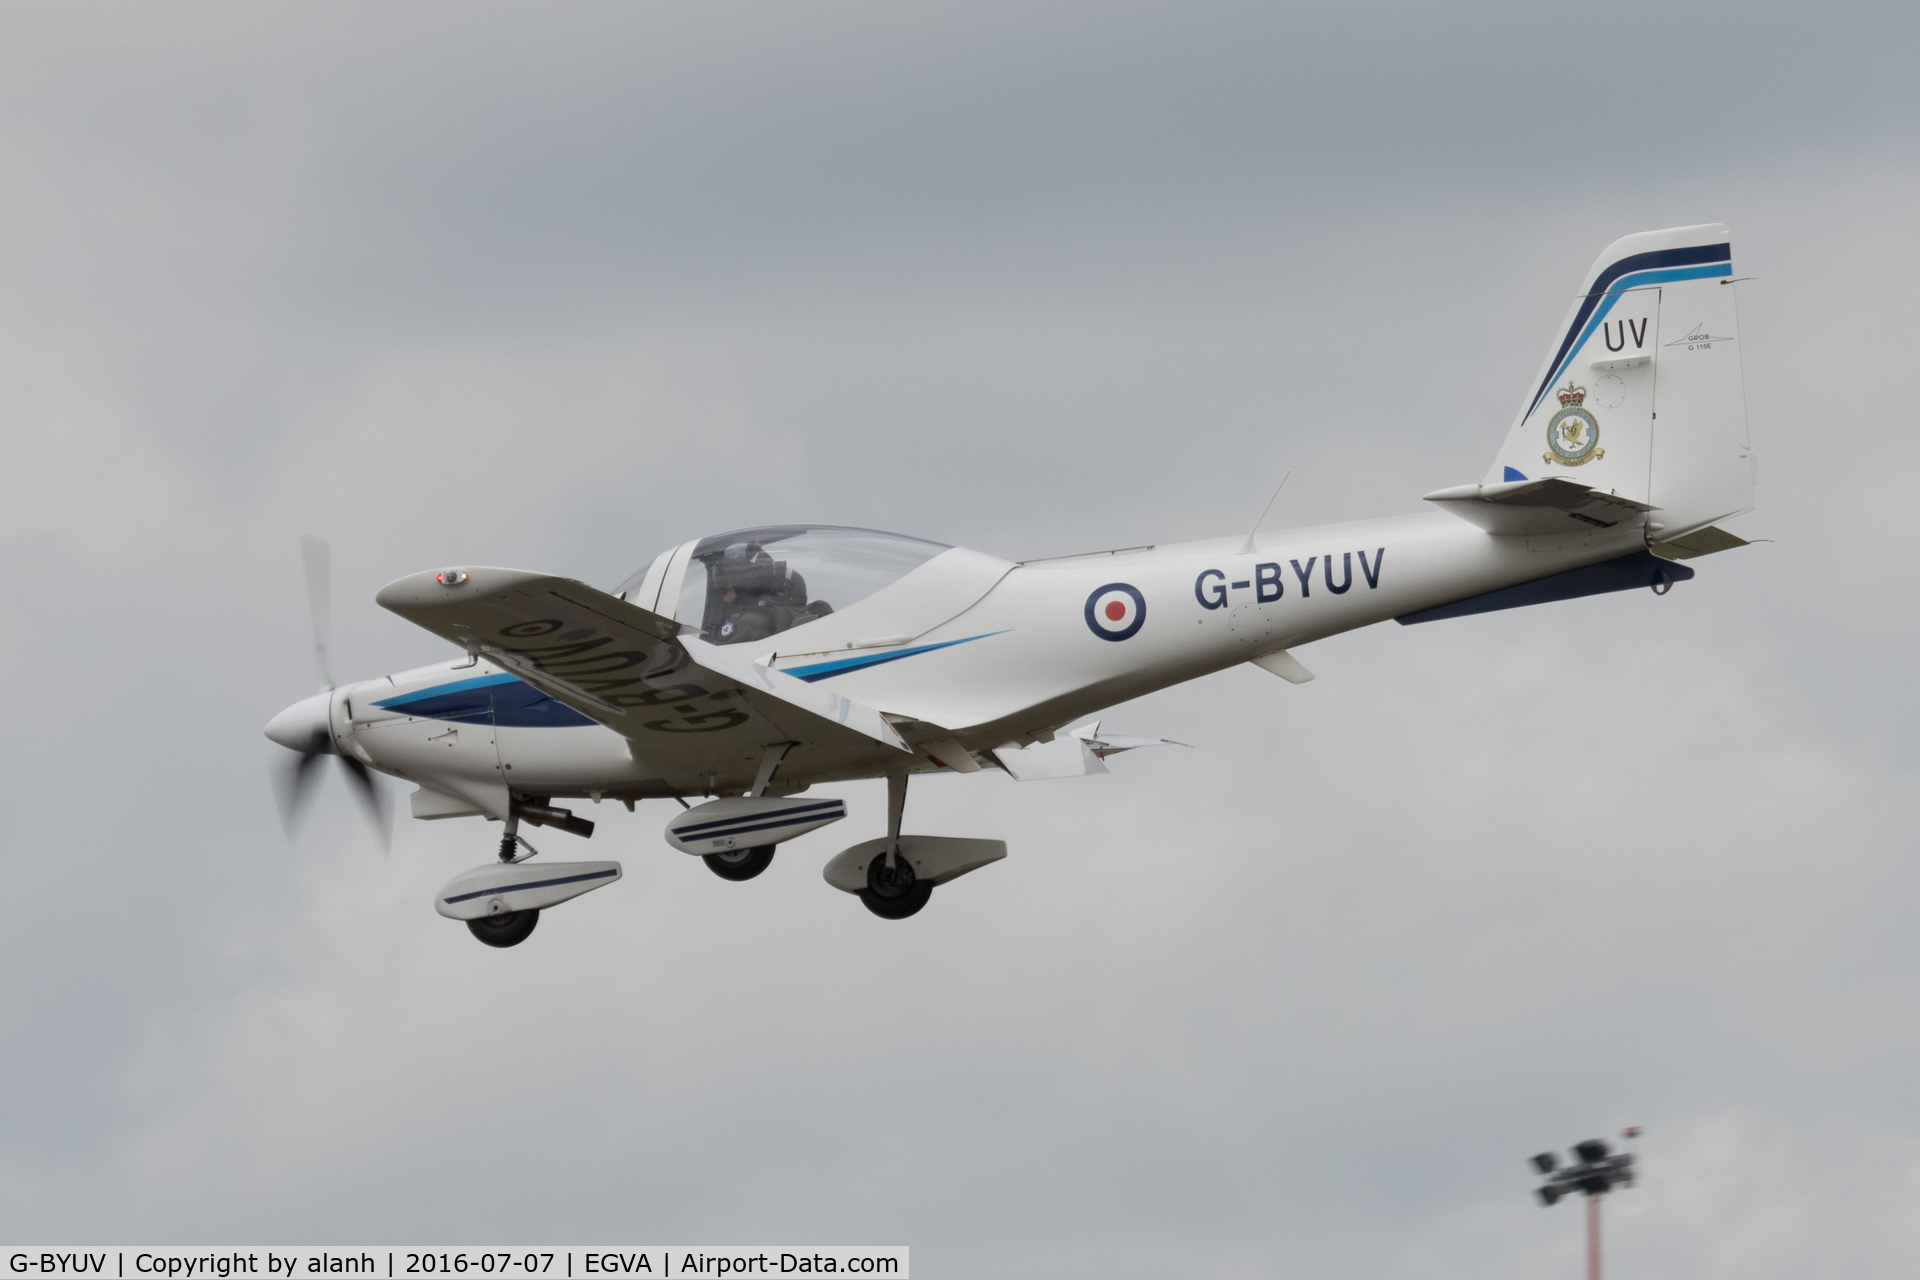 G-BYUV, 1999 Grob G-115E Tutor T1 C/N 82106/E, Arriving at RIAT 2016 (in company with G-BYUL)